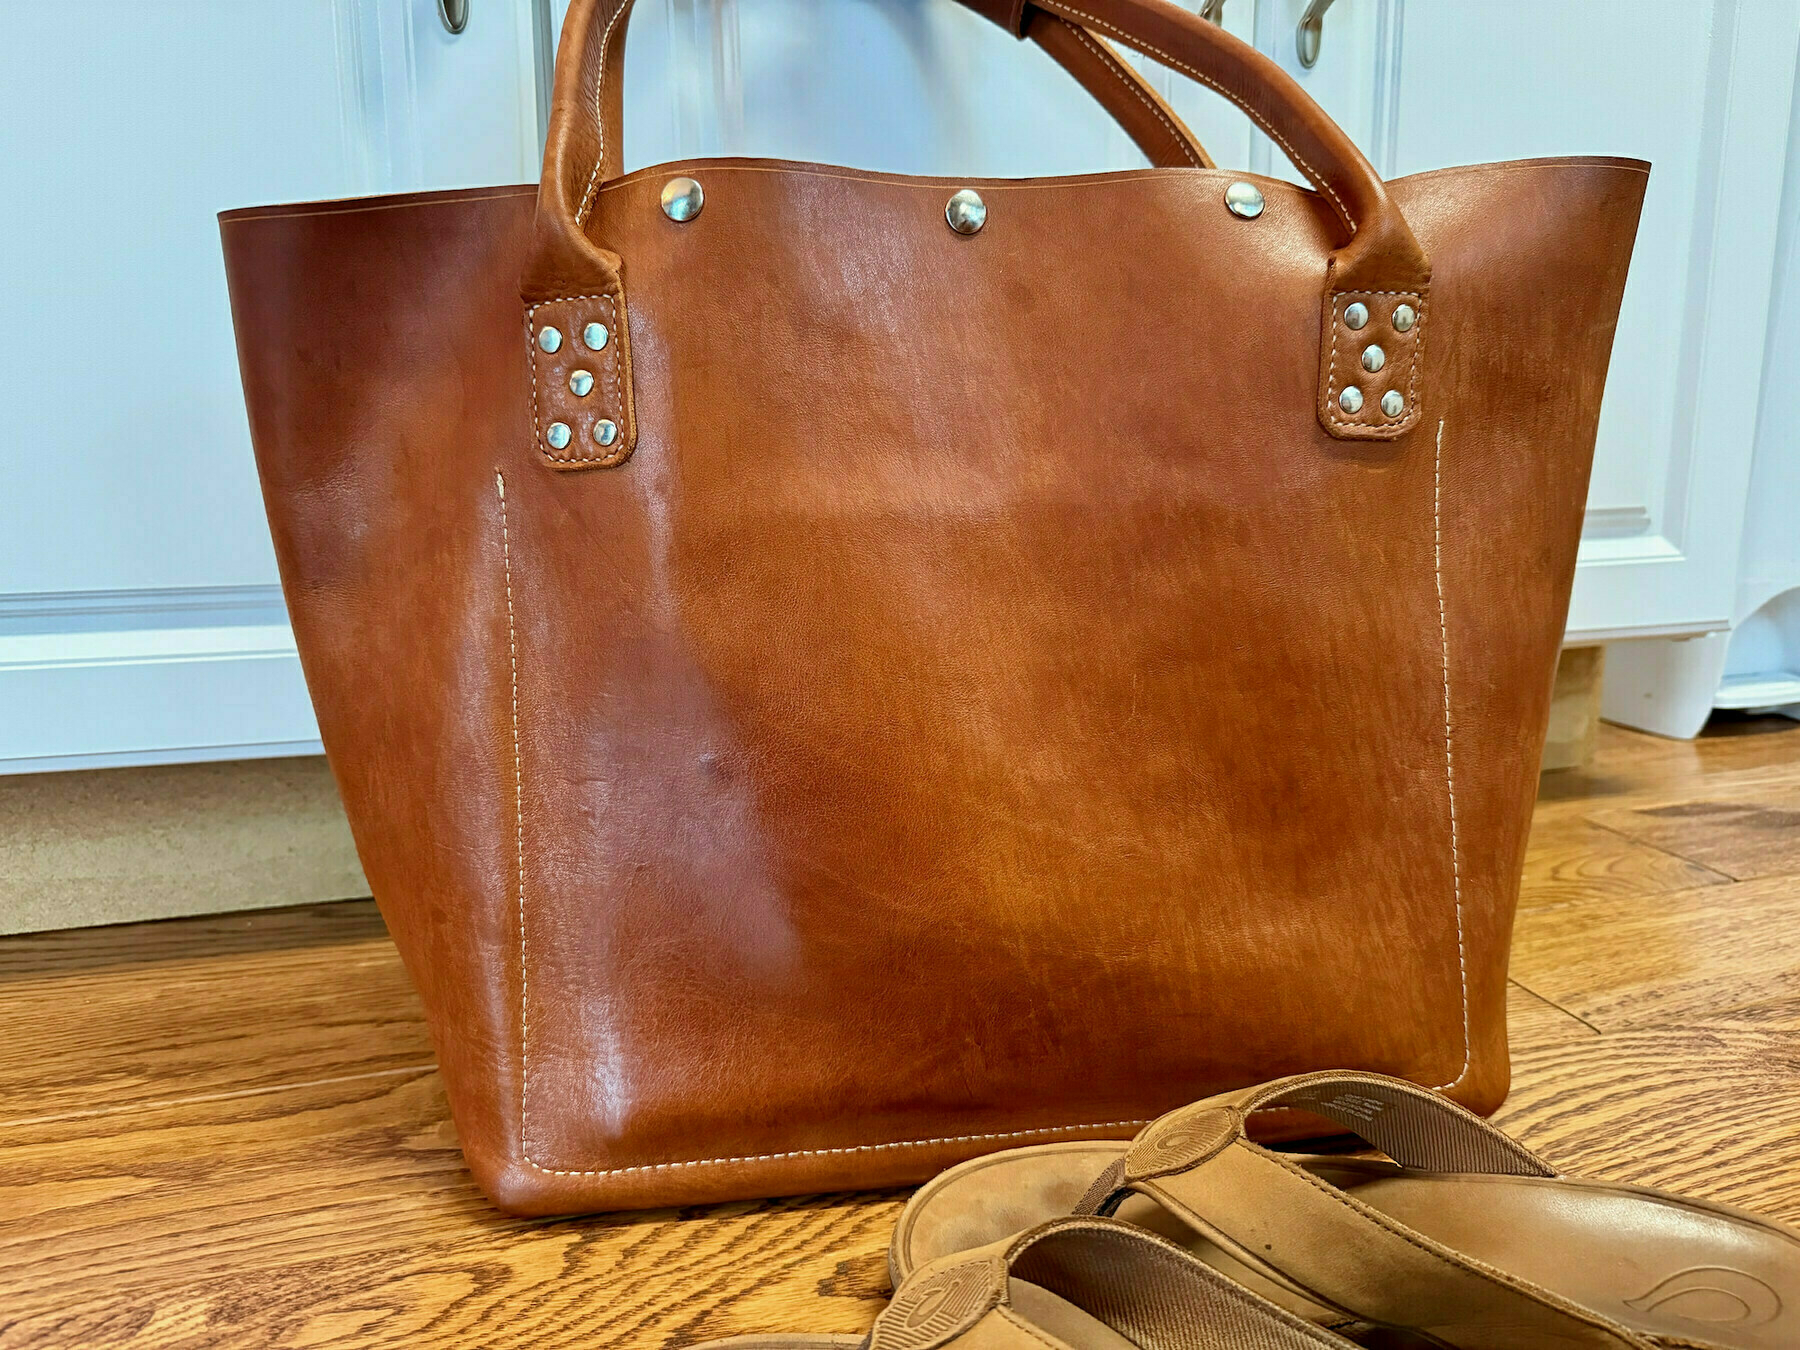 A brown leather tote bag with metal accents is placed on a wooden floor beside a pair of matching brown flip-flops.